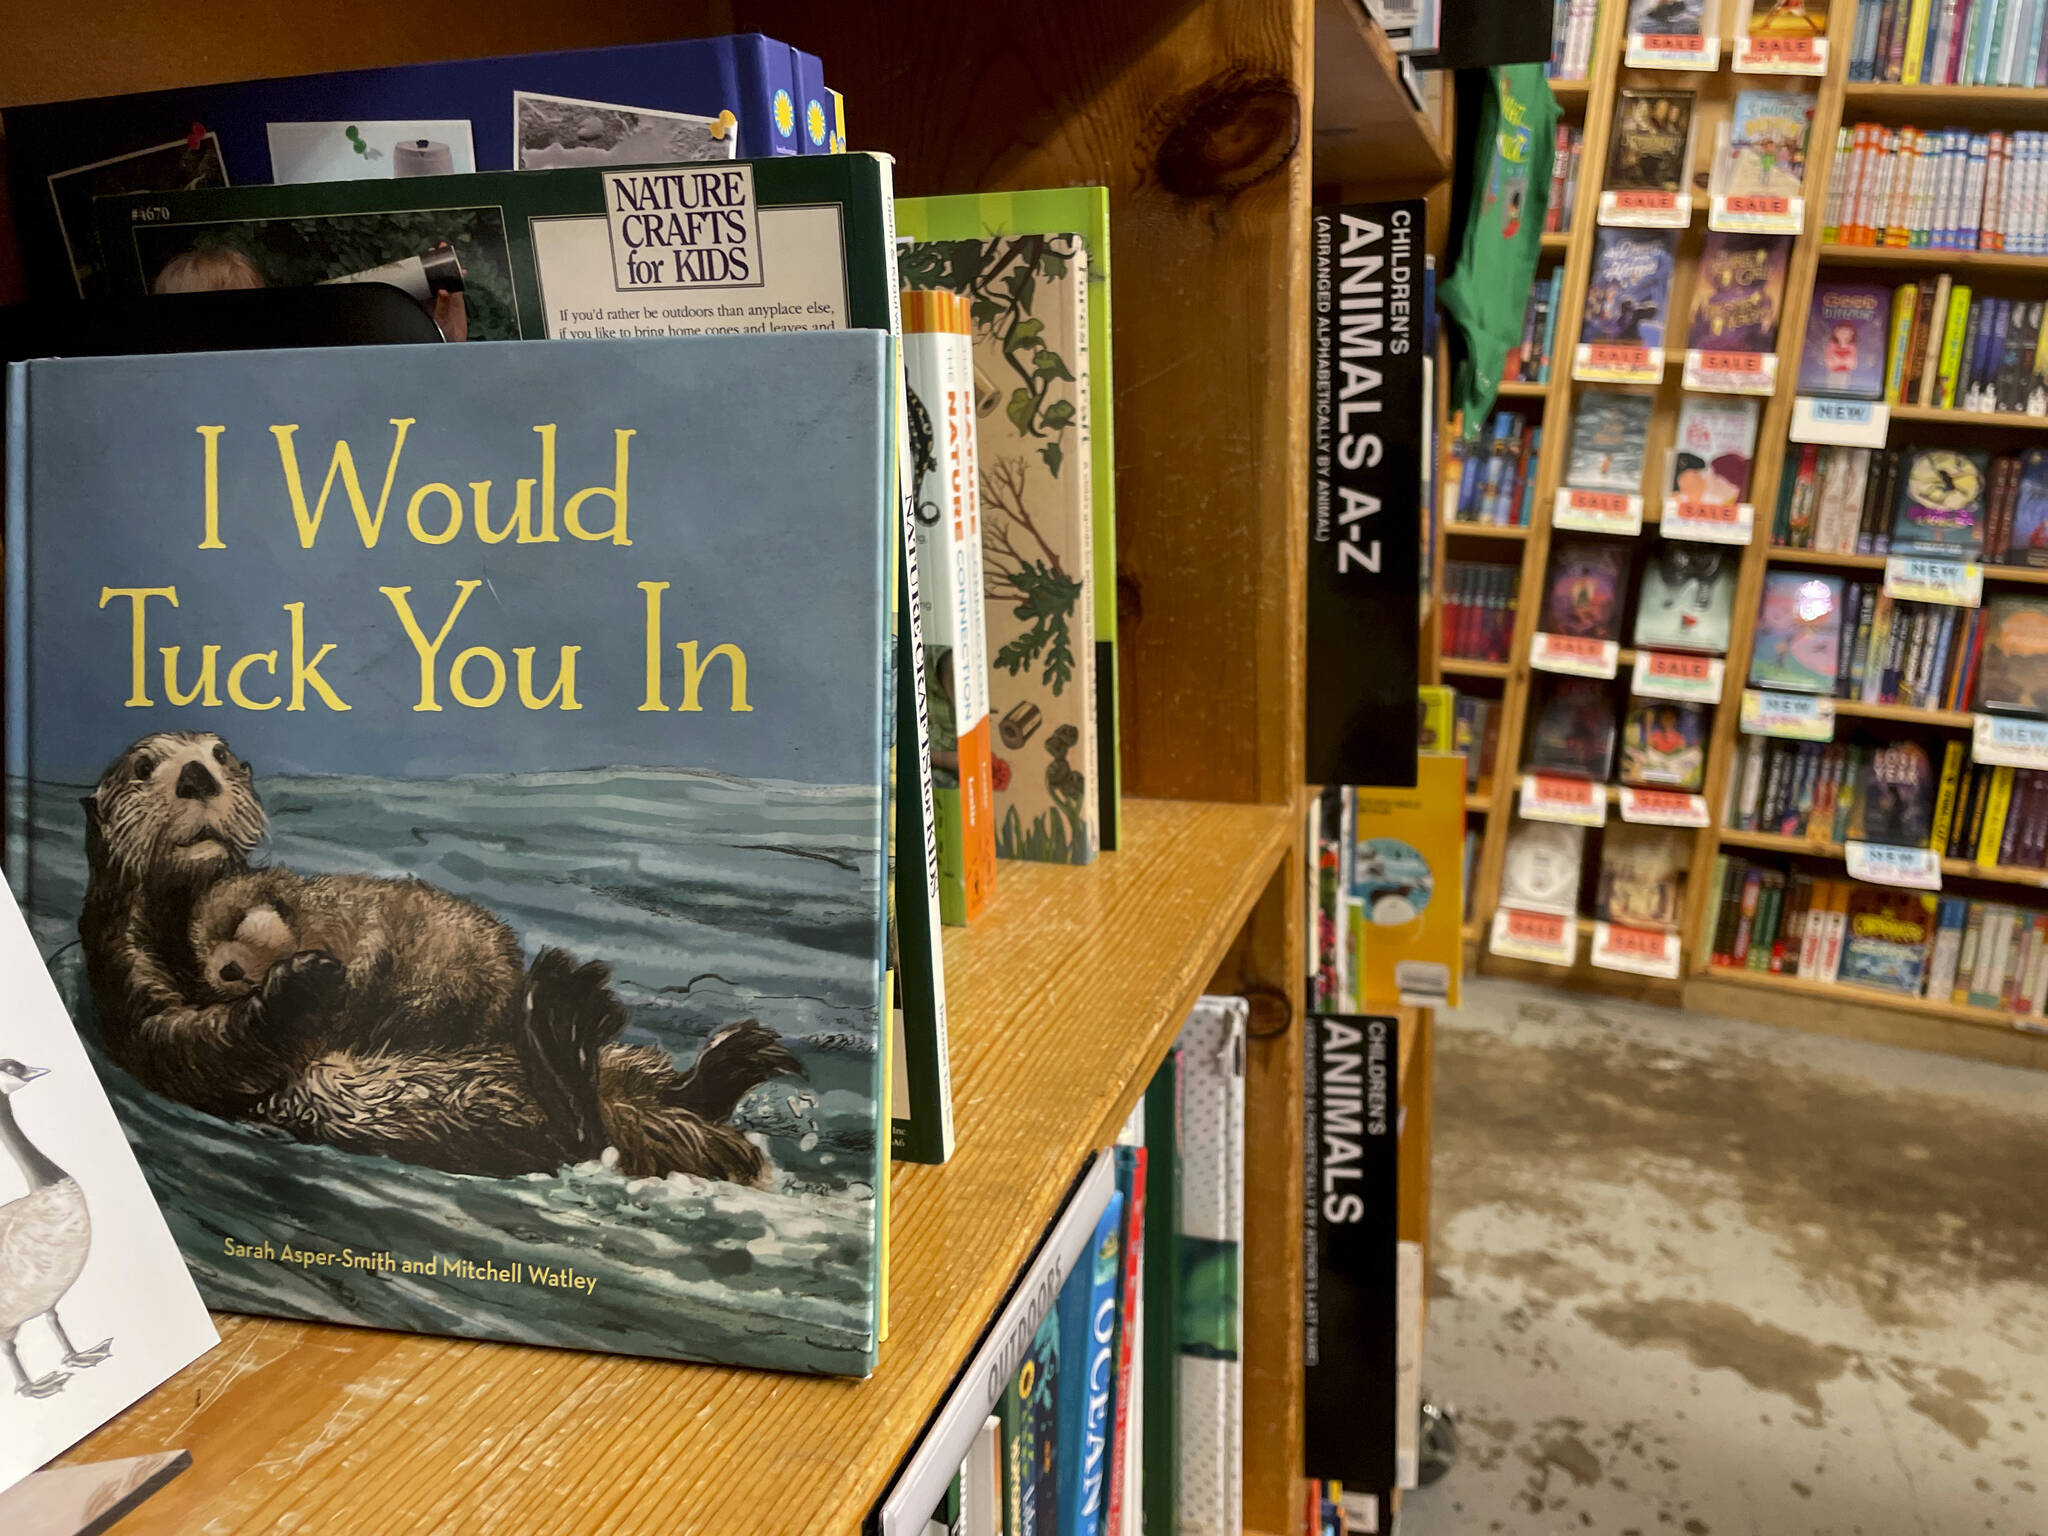 The children’s book “I Would Tuck You In,” illustrated by Mitchell Thomas Watley, is shown at a bookstore in Portland, Ore. in this April 5, 2023 photo. Publisher Sasquatch books, owned by Penguin Random House, said Wednesday, April 5, 2023, it has ended its publishing relationship with Watley after he was arrested on allegations of leaving violent, transphobic notes in stores around Juneau, Alaska. Watley told police he was motivated by fear following a deadly school shooting in Nashville that sparked online backlash about the shooter’s gender identity, court records show. (AP Photo/Claire Rush)